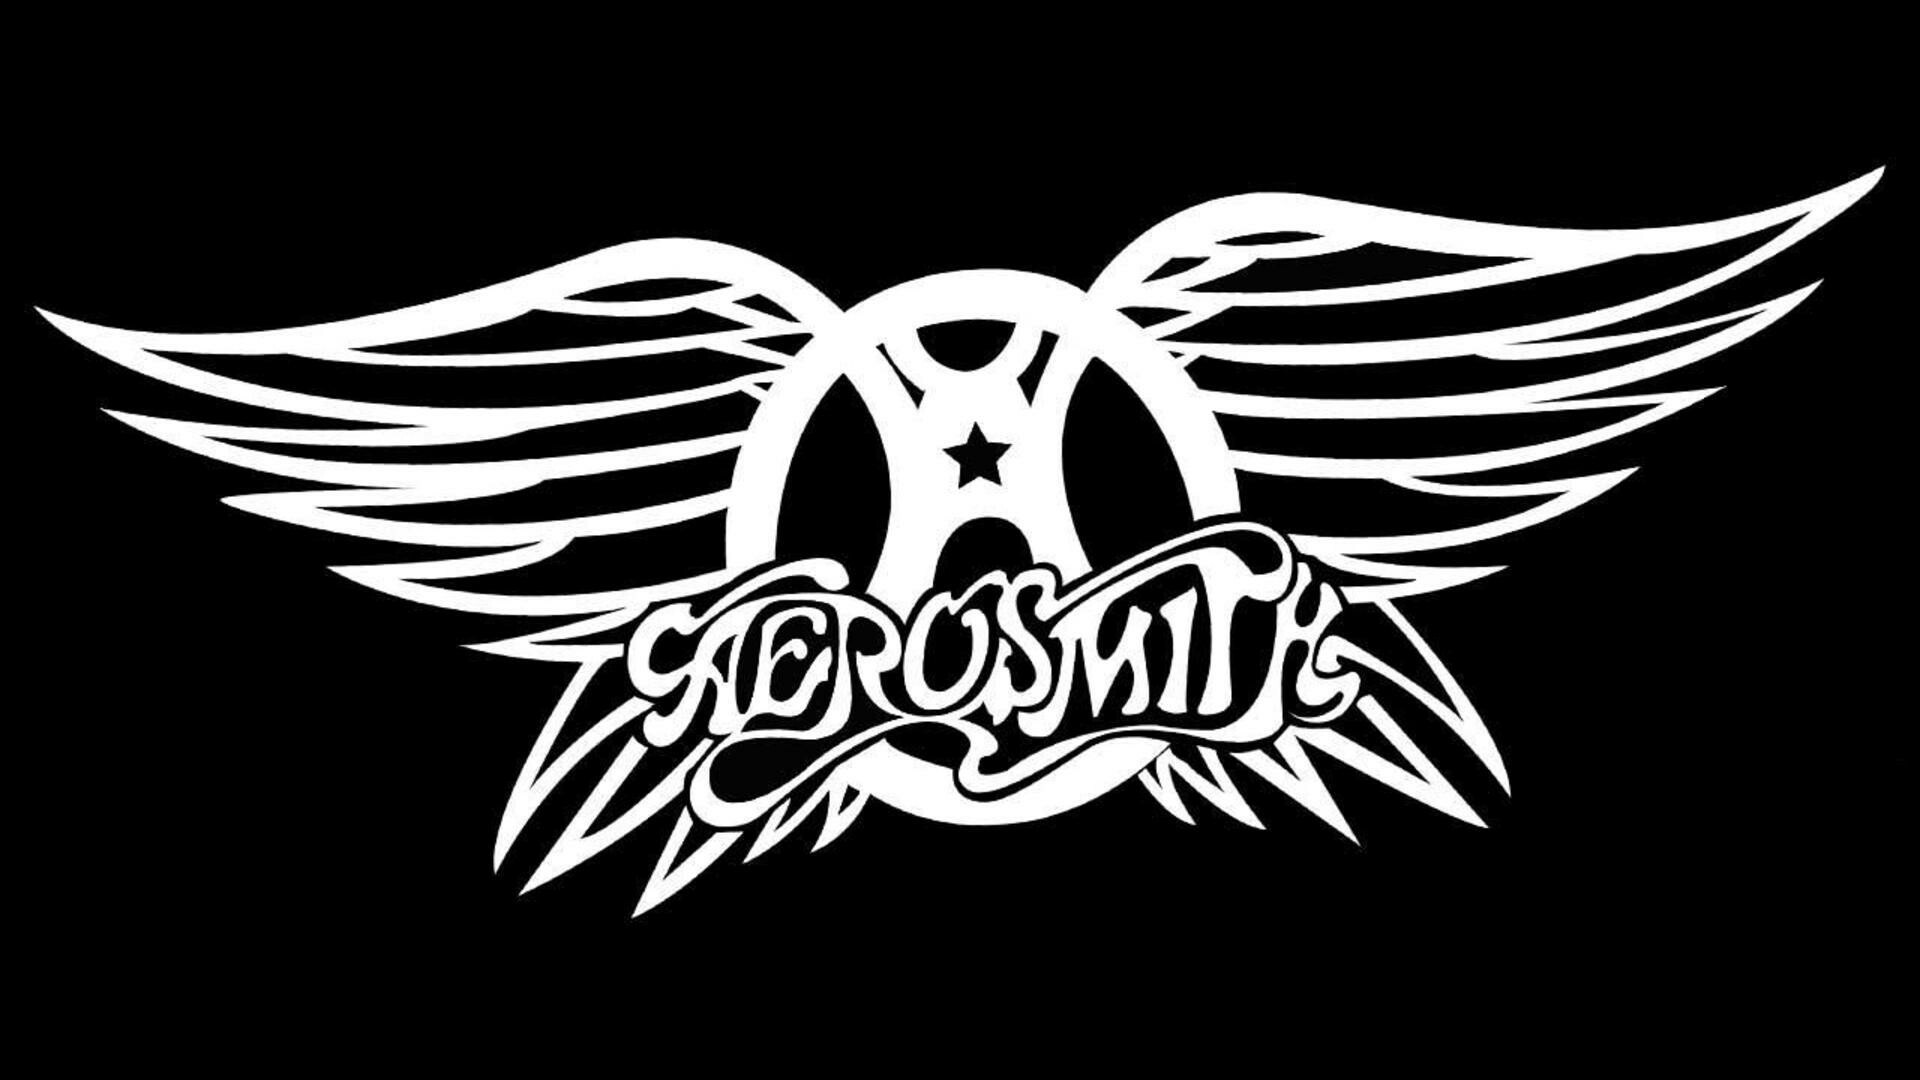 Aerosmith, band wallpapers, rock and roll, music enthusiasts, 1920x1080 Full HD Desktop